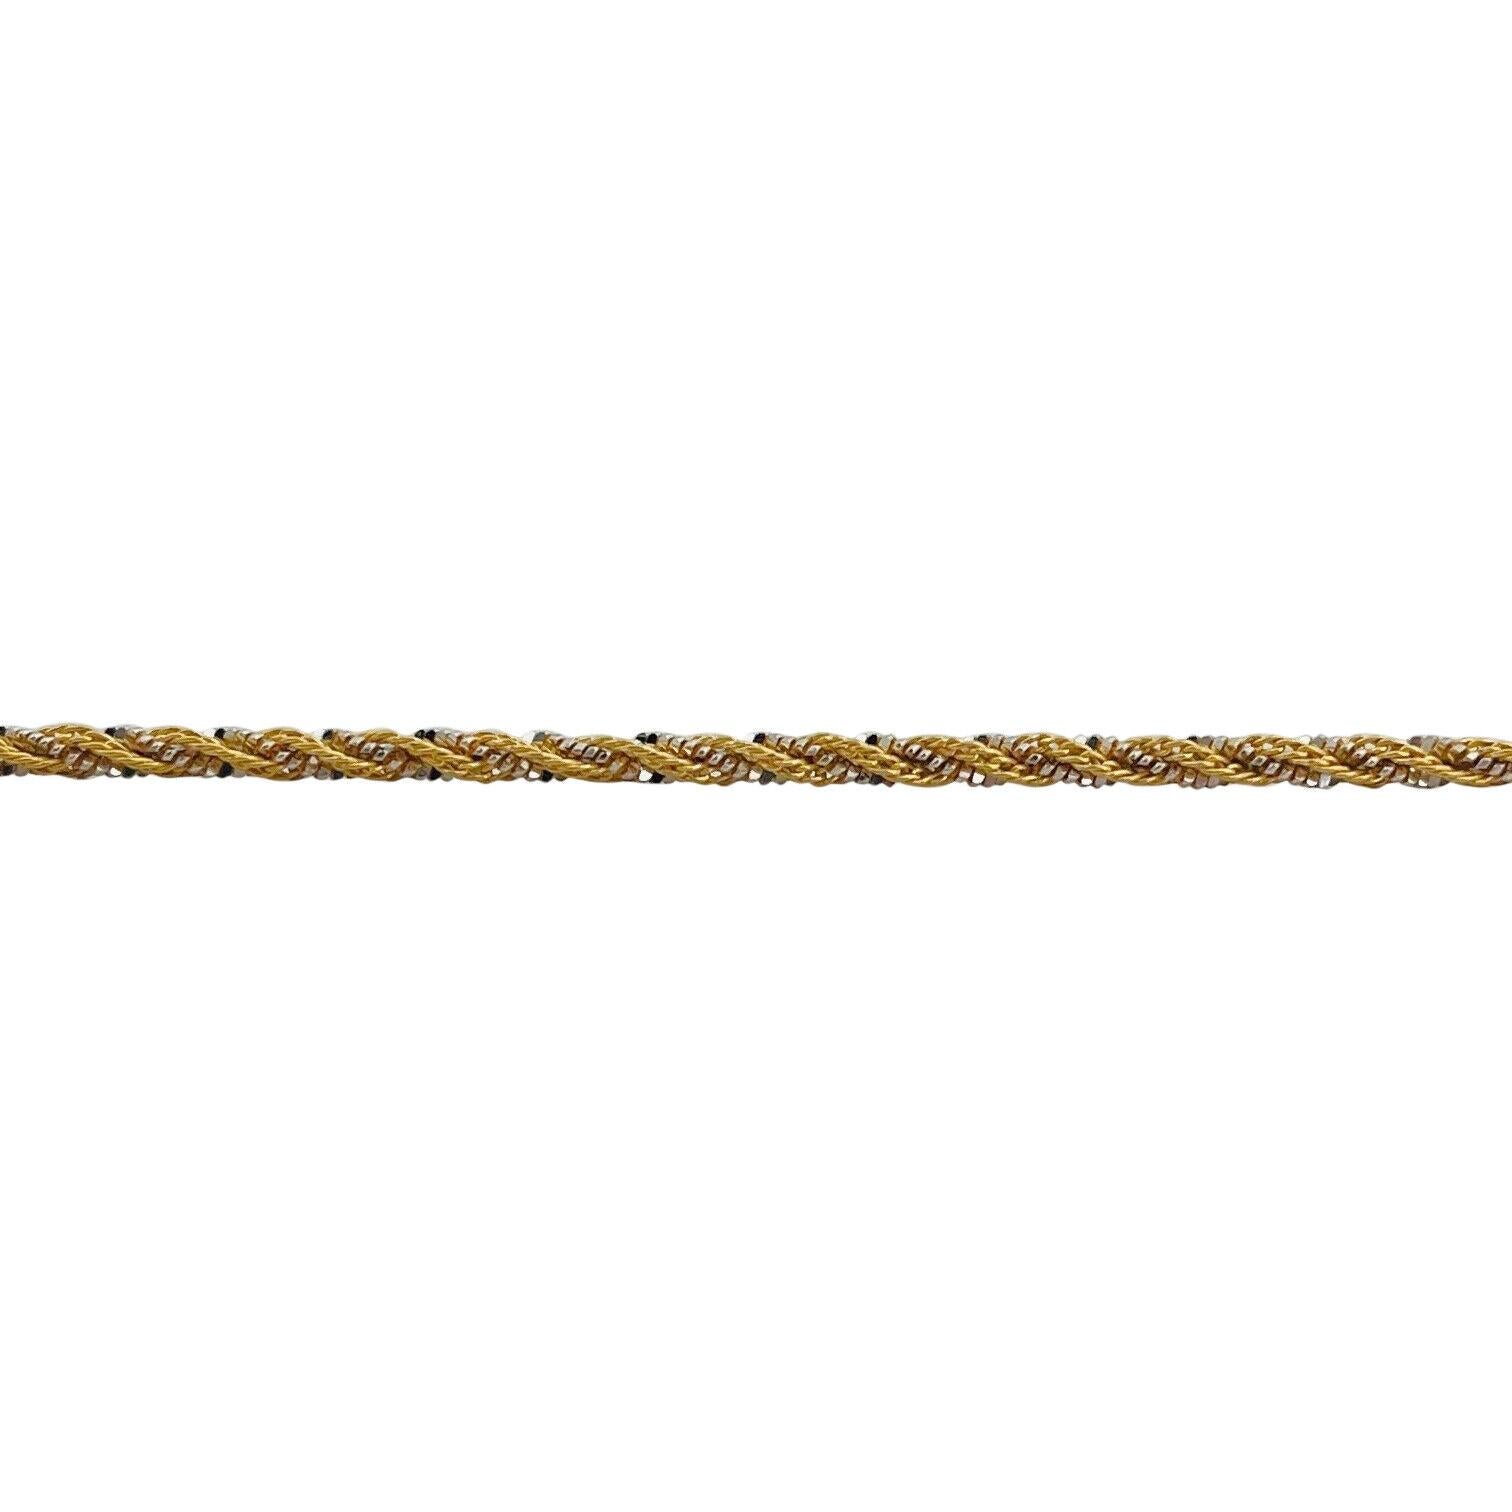 Women's or Men's 22 Karat Yellow and White Gold Solid Thin Twisted Rope Necklace 